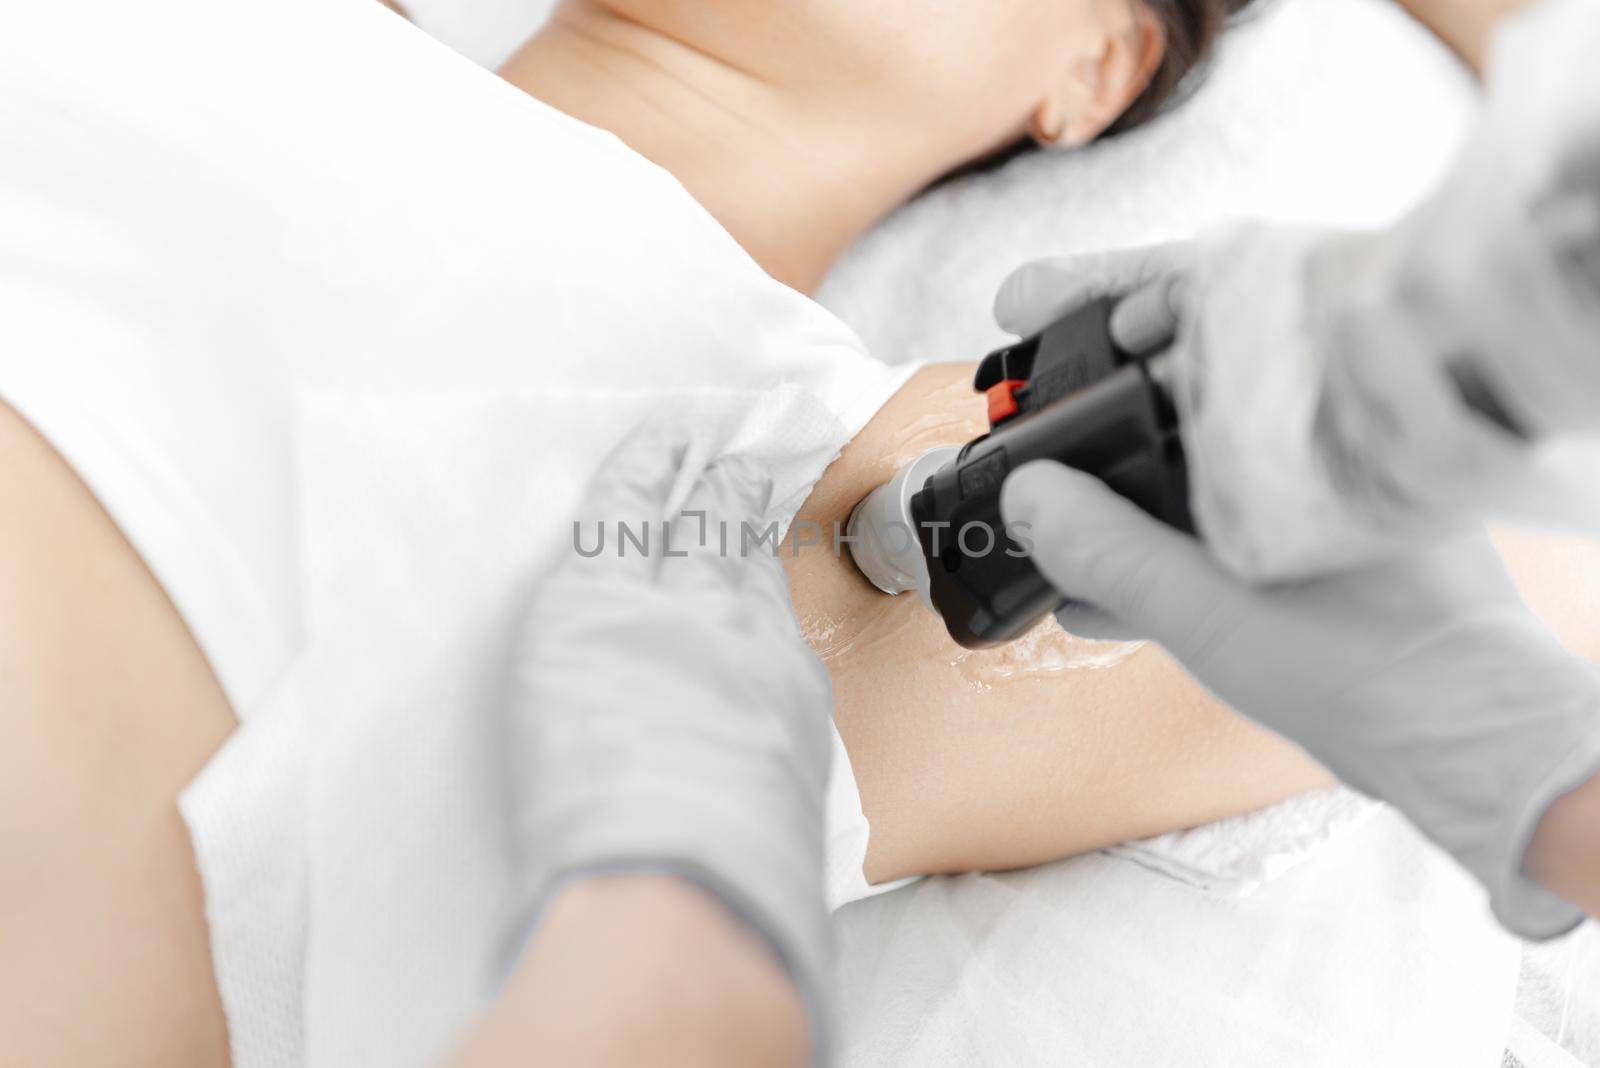 the process of laser hair removal close-up. Underarm hair removal laser close-up by gulyaevstudio